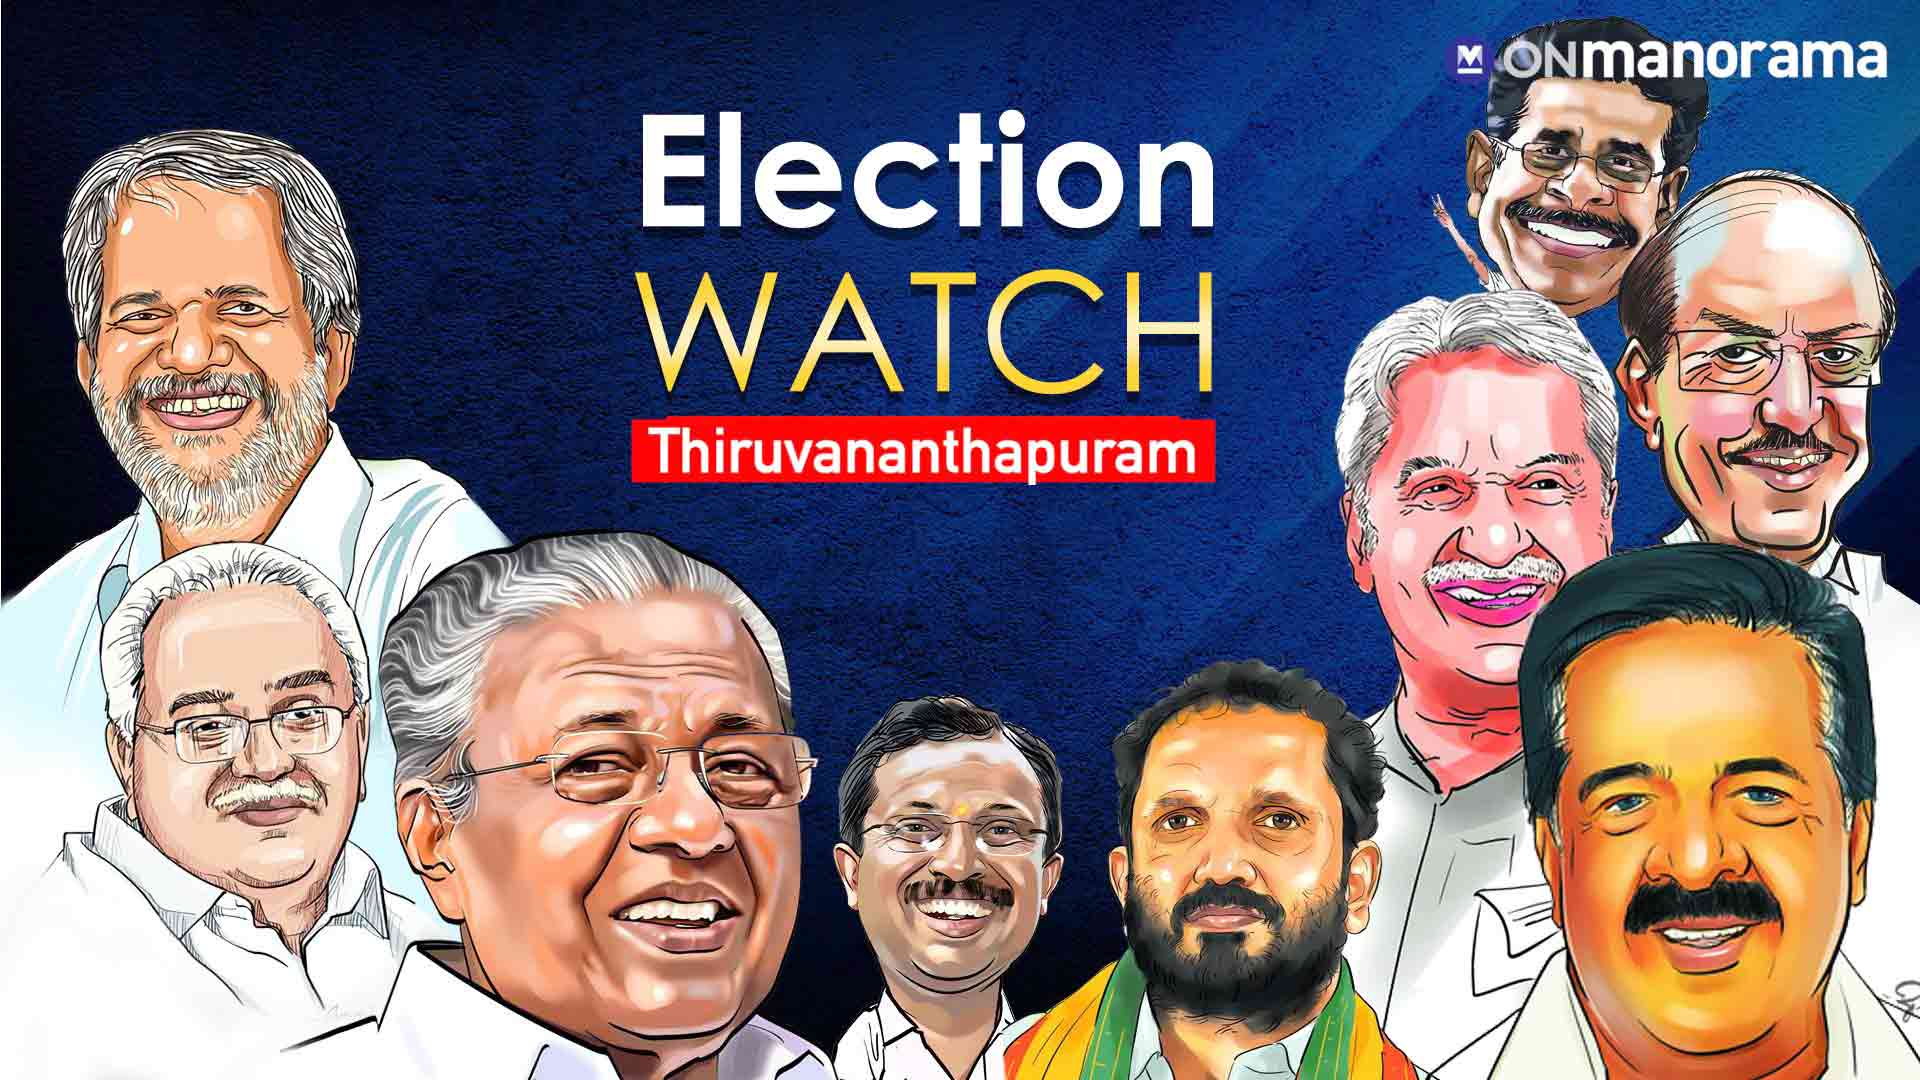 India Election Watch, 4th April 2019 - YouTube